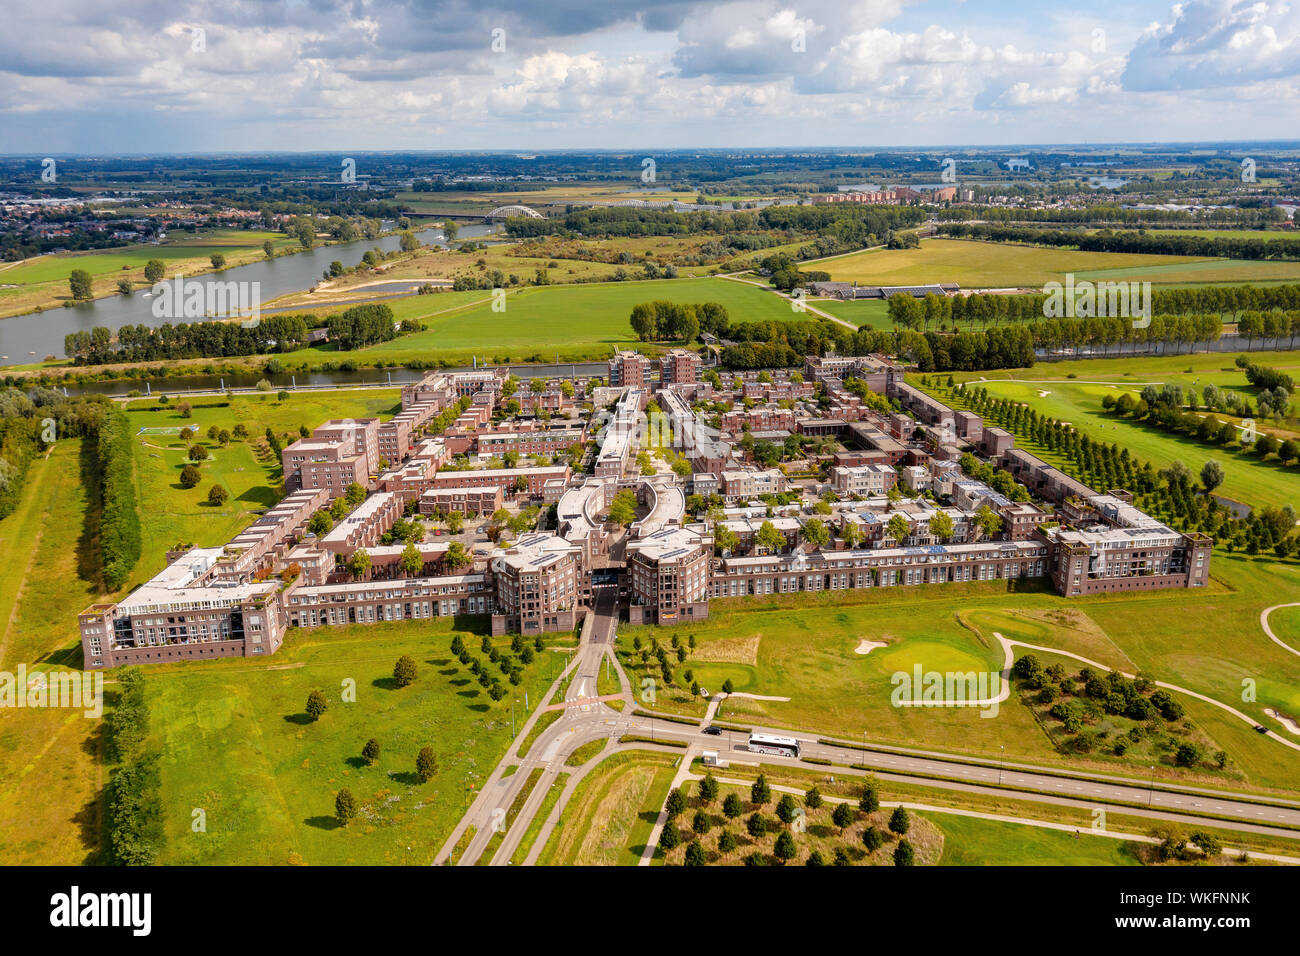 The special architecture of the castle houses in Den Bosch from the air Stock Photo